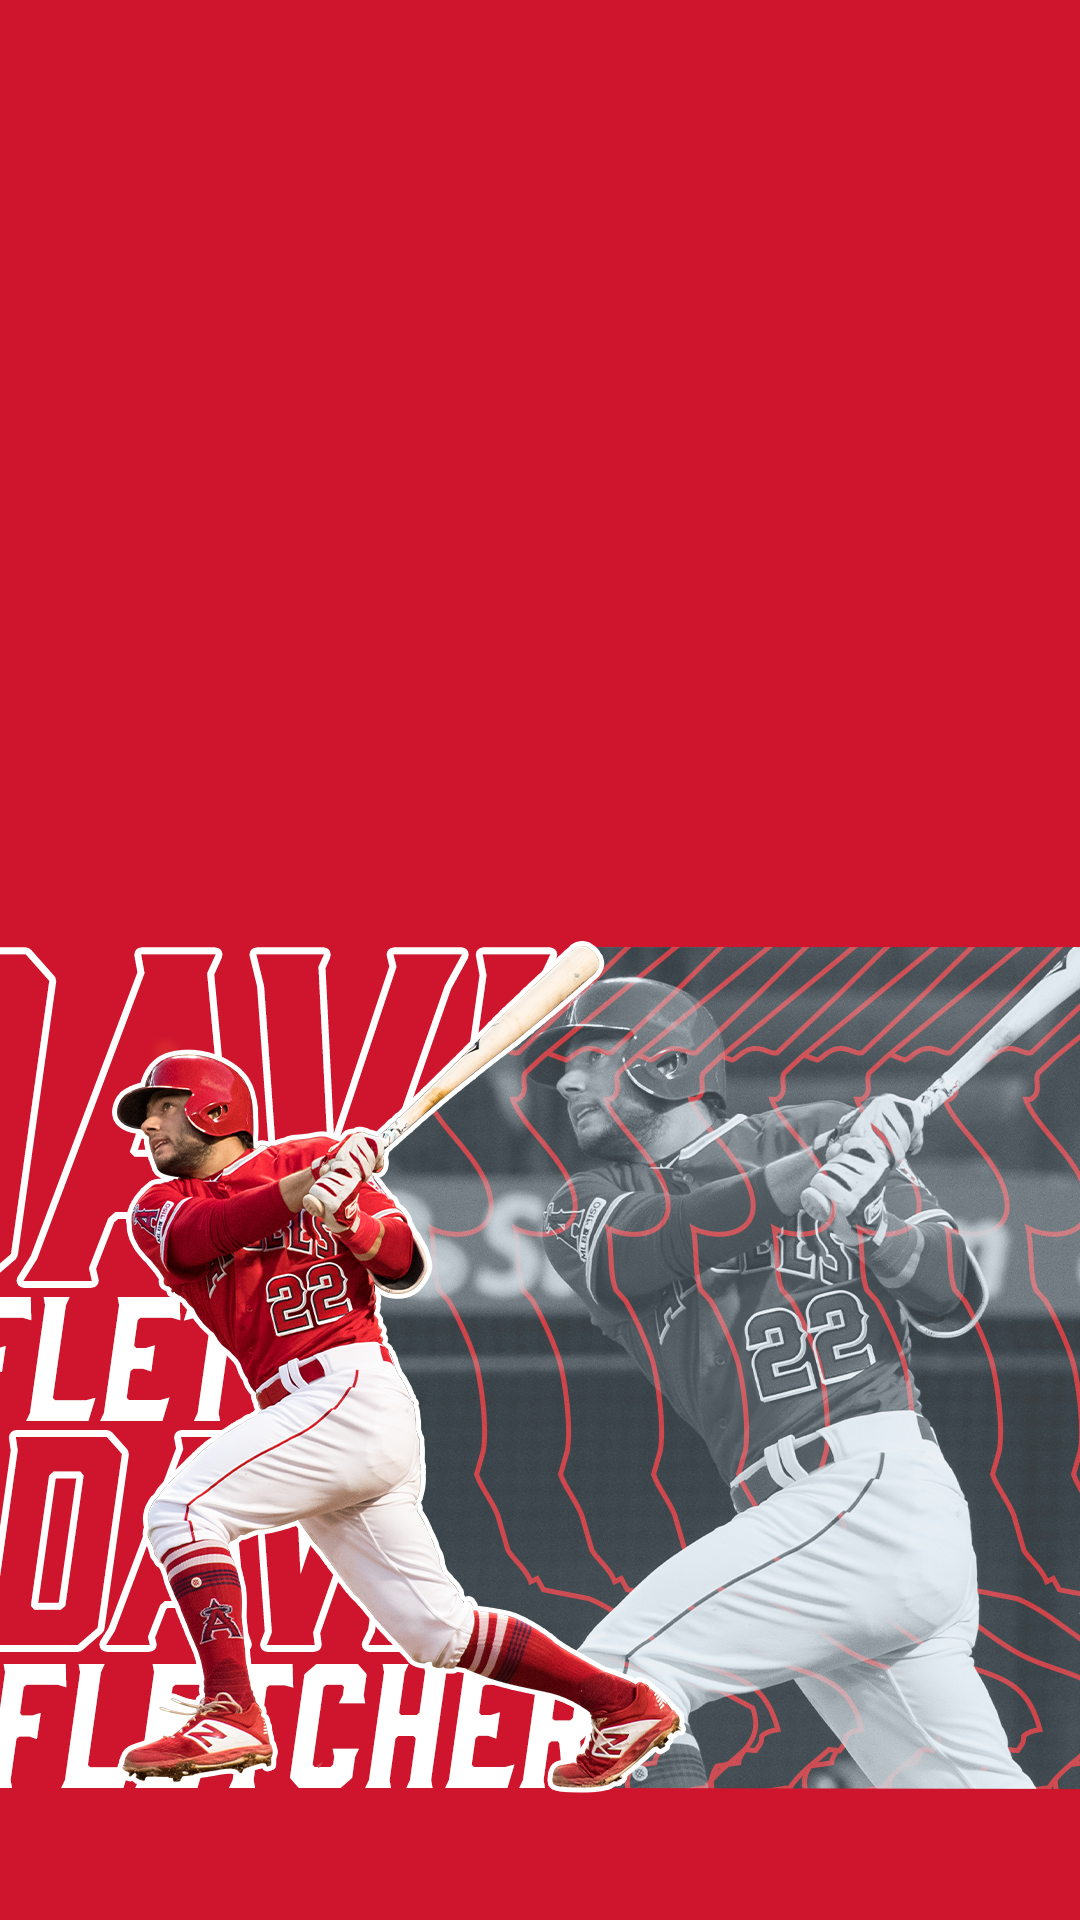 Download wallpapers Los Angeles Angels West division MLB 4K red white  abstraction logo material design baseball Anaheim California USA  Major League Baseball for desktop with resolution 3840x2400 High Quality  HD pictures wallpapers